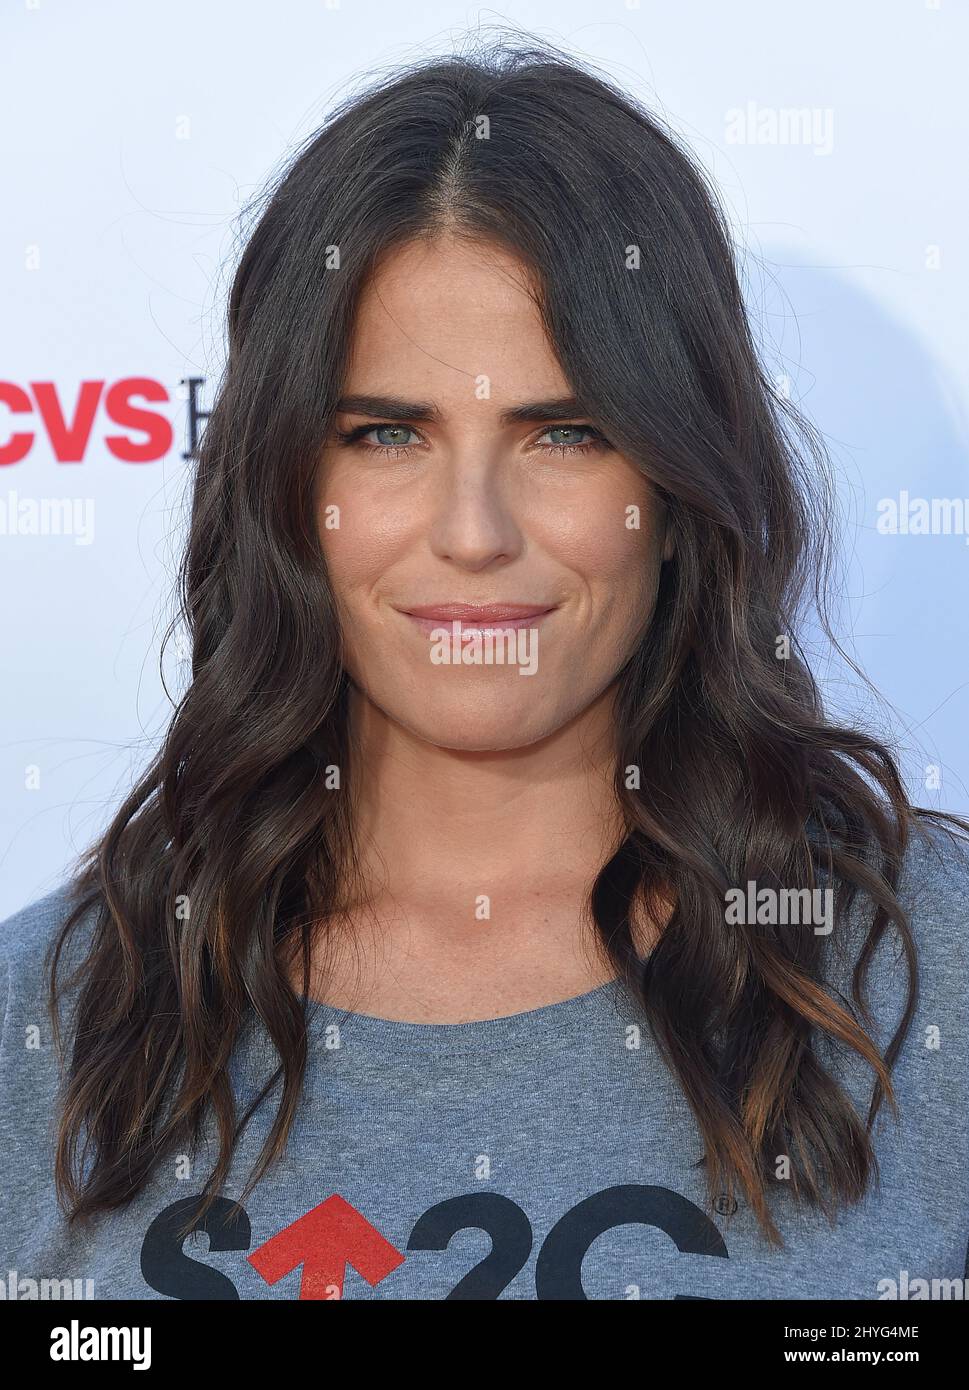 Karla Souza at the 2018 Stand Up To Cancer (SU2C) telecast held at Barker Hangar at the Santa Monica Airport on September 7, 2018 Stock Photo